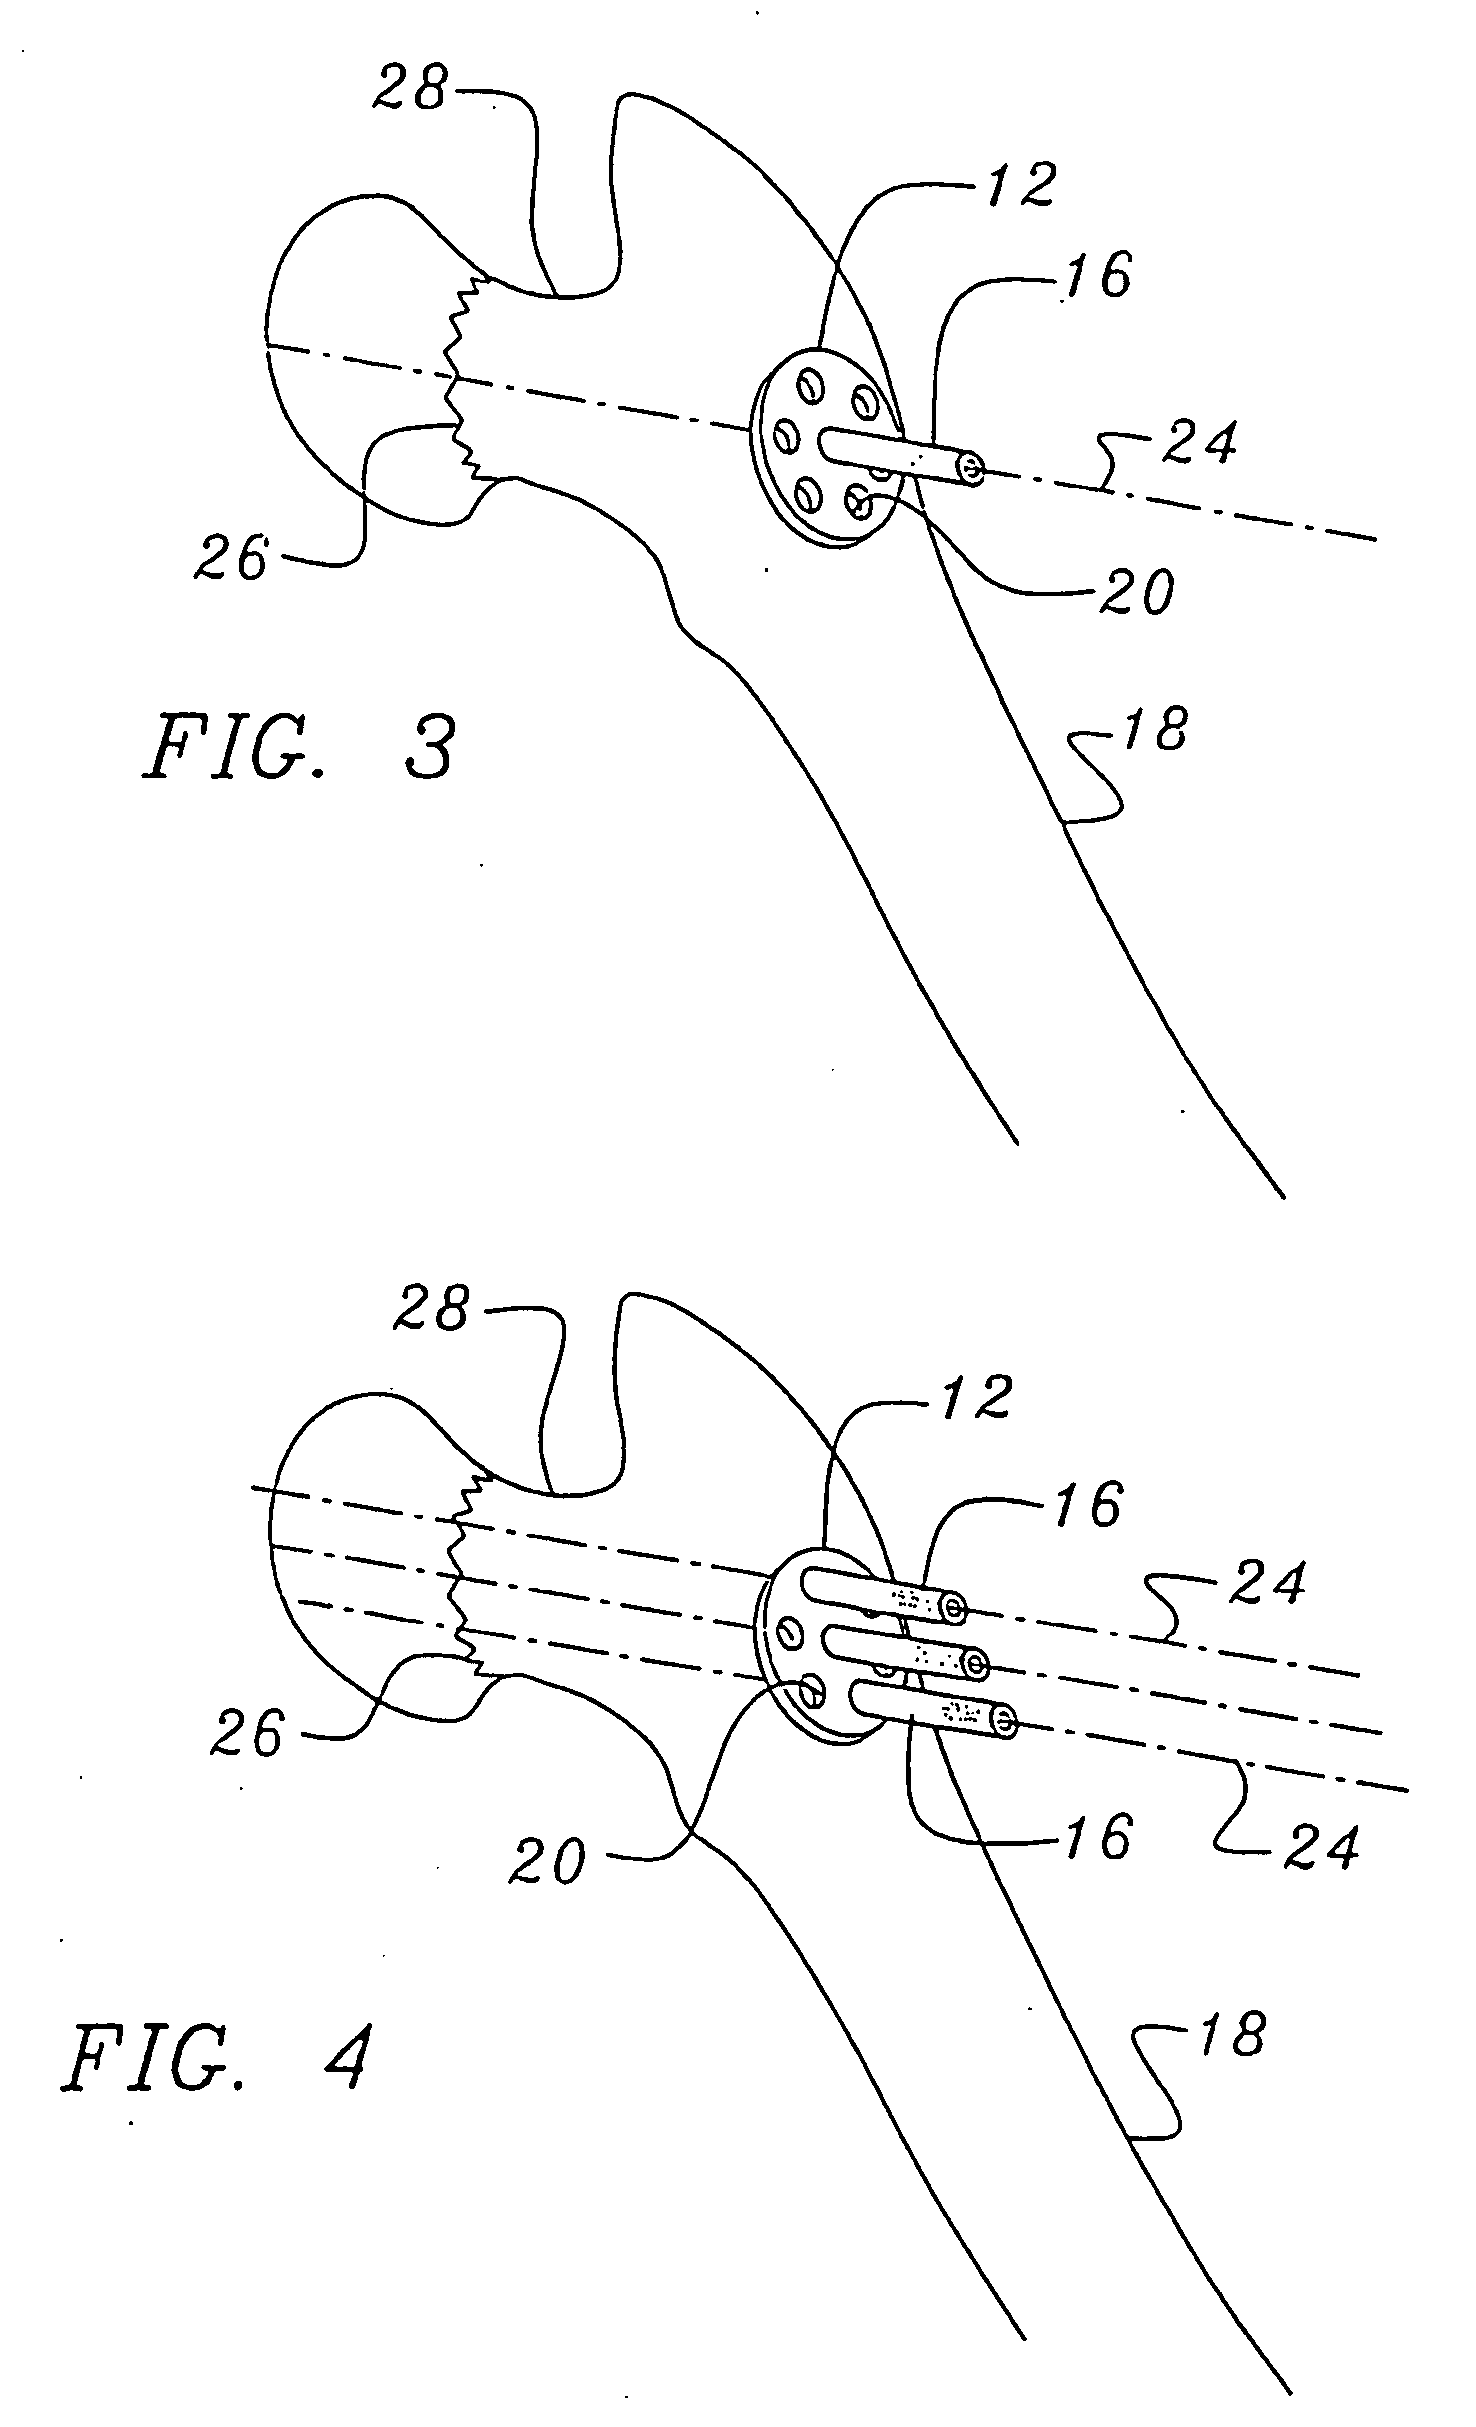 Bone end (Epiphysis) fracture fixation device and method of use